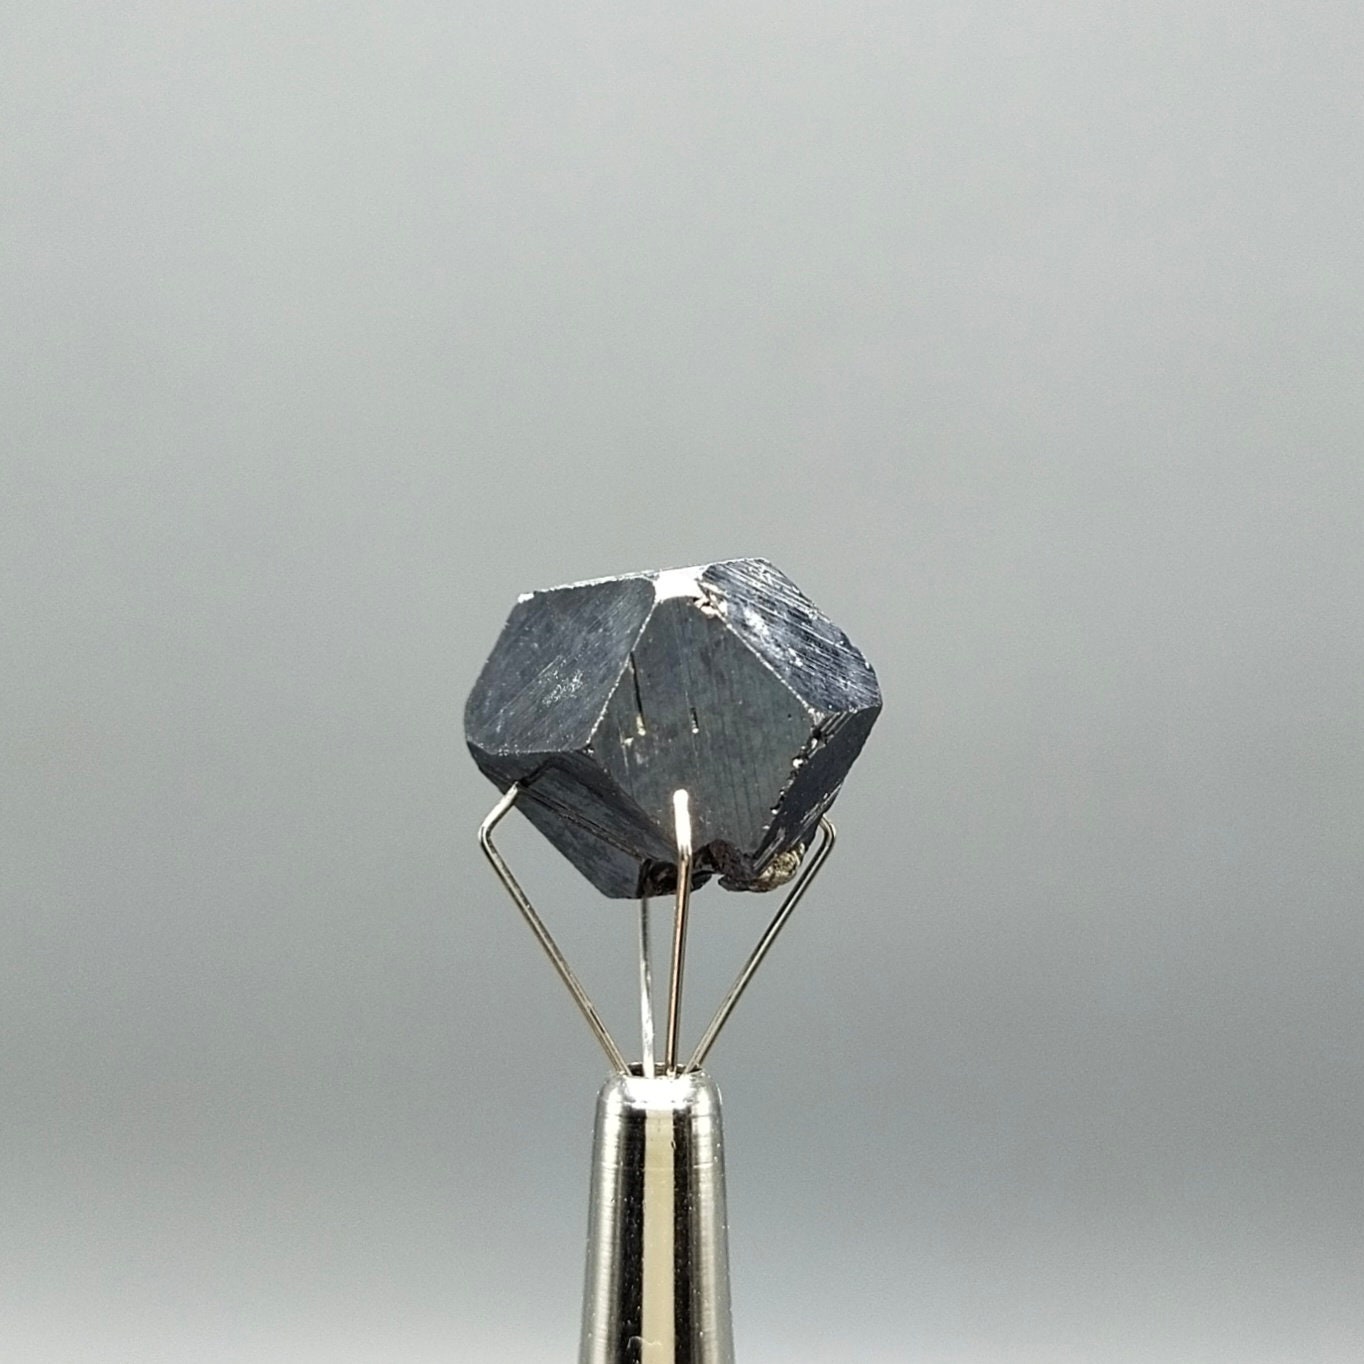 ARSAA GEMS AND MINERALSBlack Magnetite crystal with octahedral structure and patterns on surface from Skardu Gilgit Baltistan Pakistan, 4.8 grams - Premium  from ARSAA GEMS AND MINERALS - Just $30.00! Shop now at ARSAA GEMS AND MINERALS